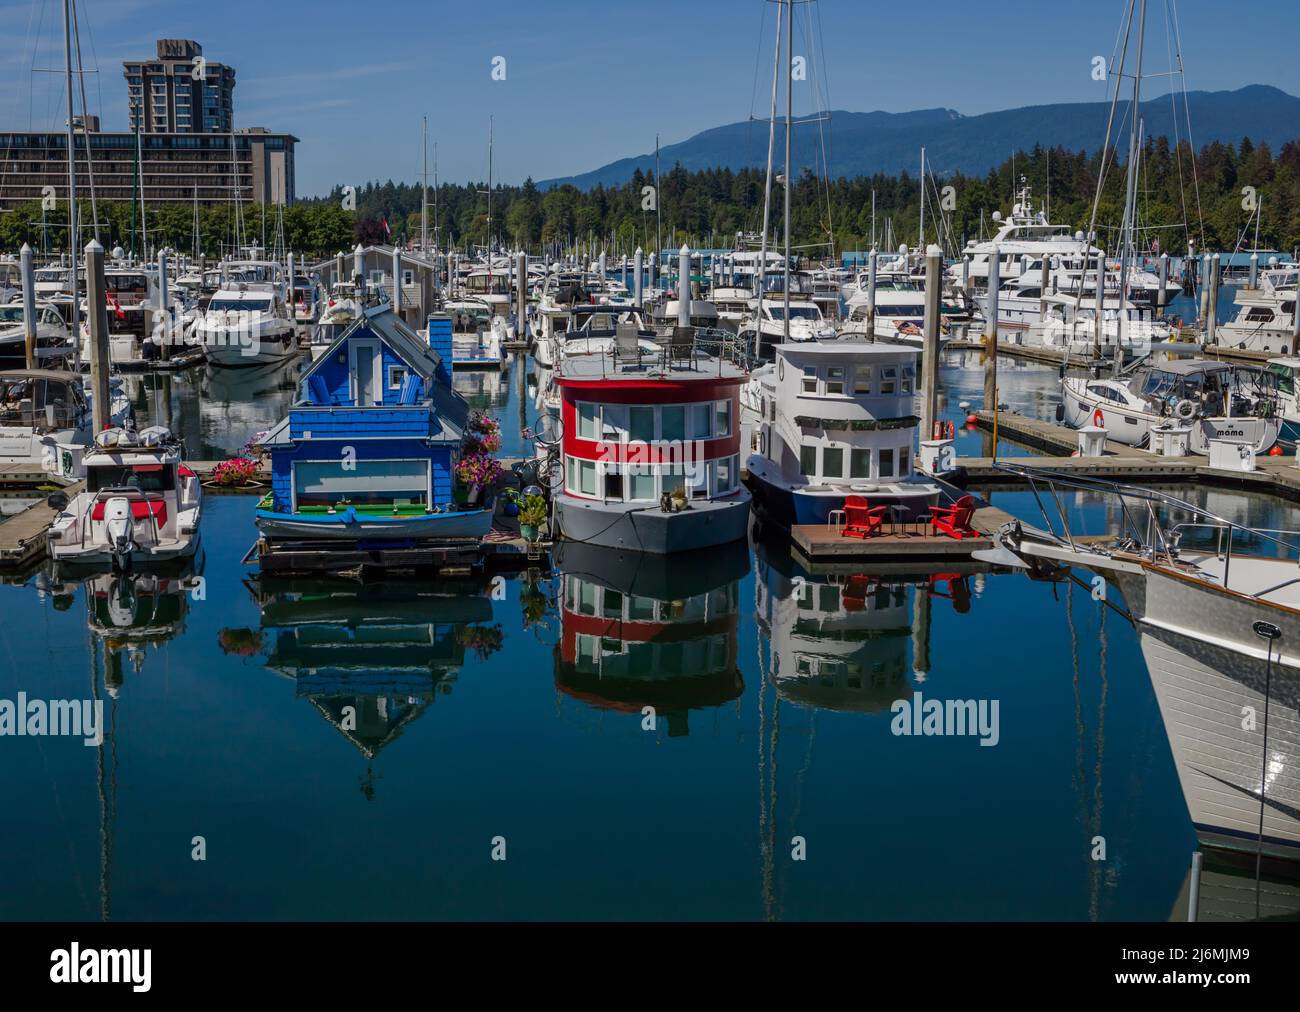 Cute, colourful floating houseboats line the docks with calm water reflections. This alternative housing is growing in popularity with a challenging h Stock Photo